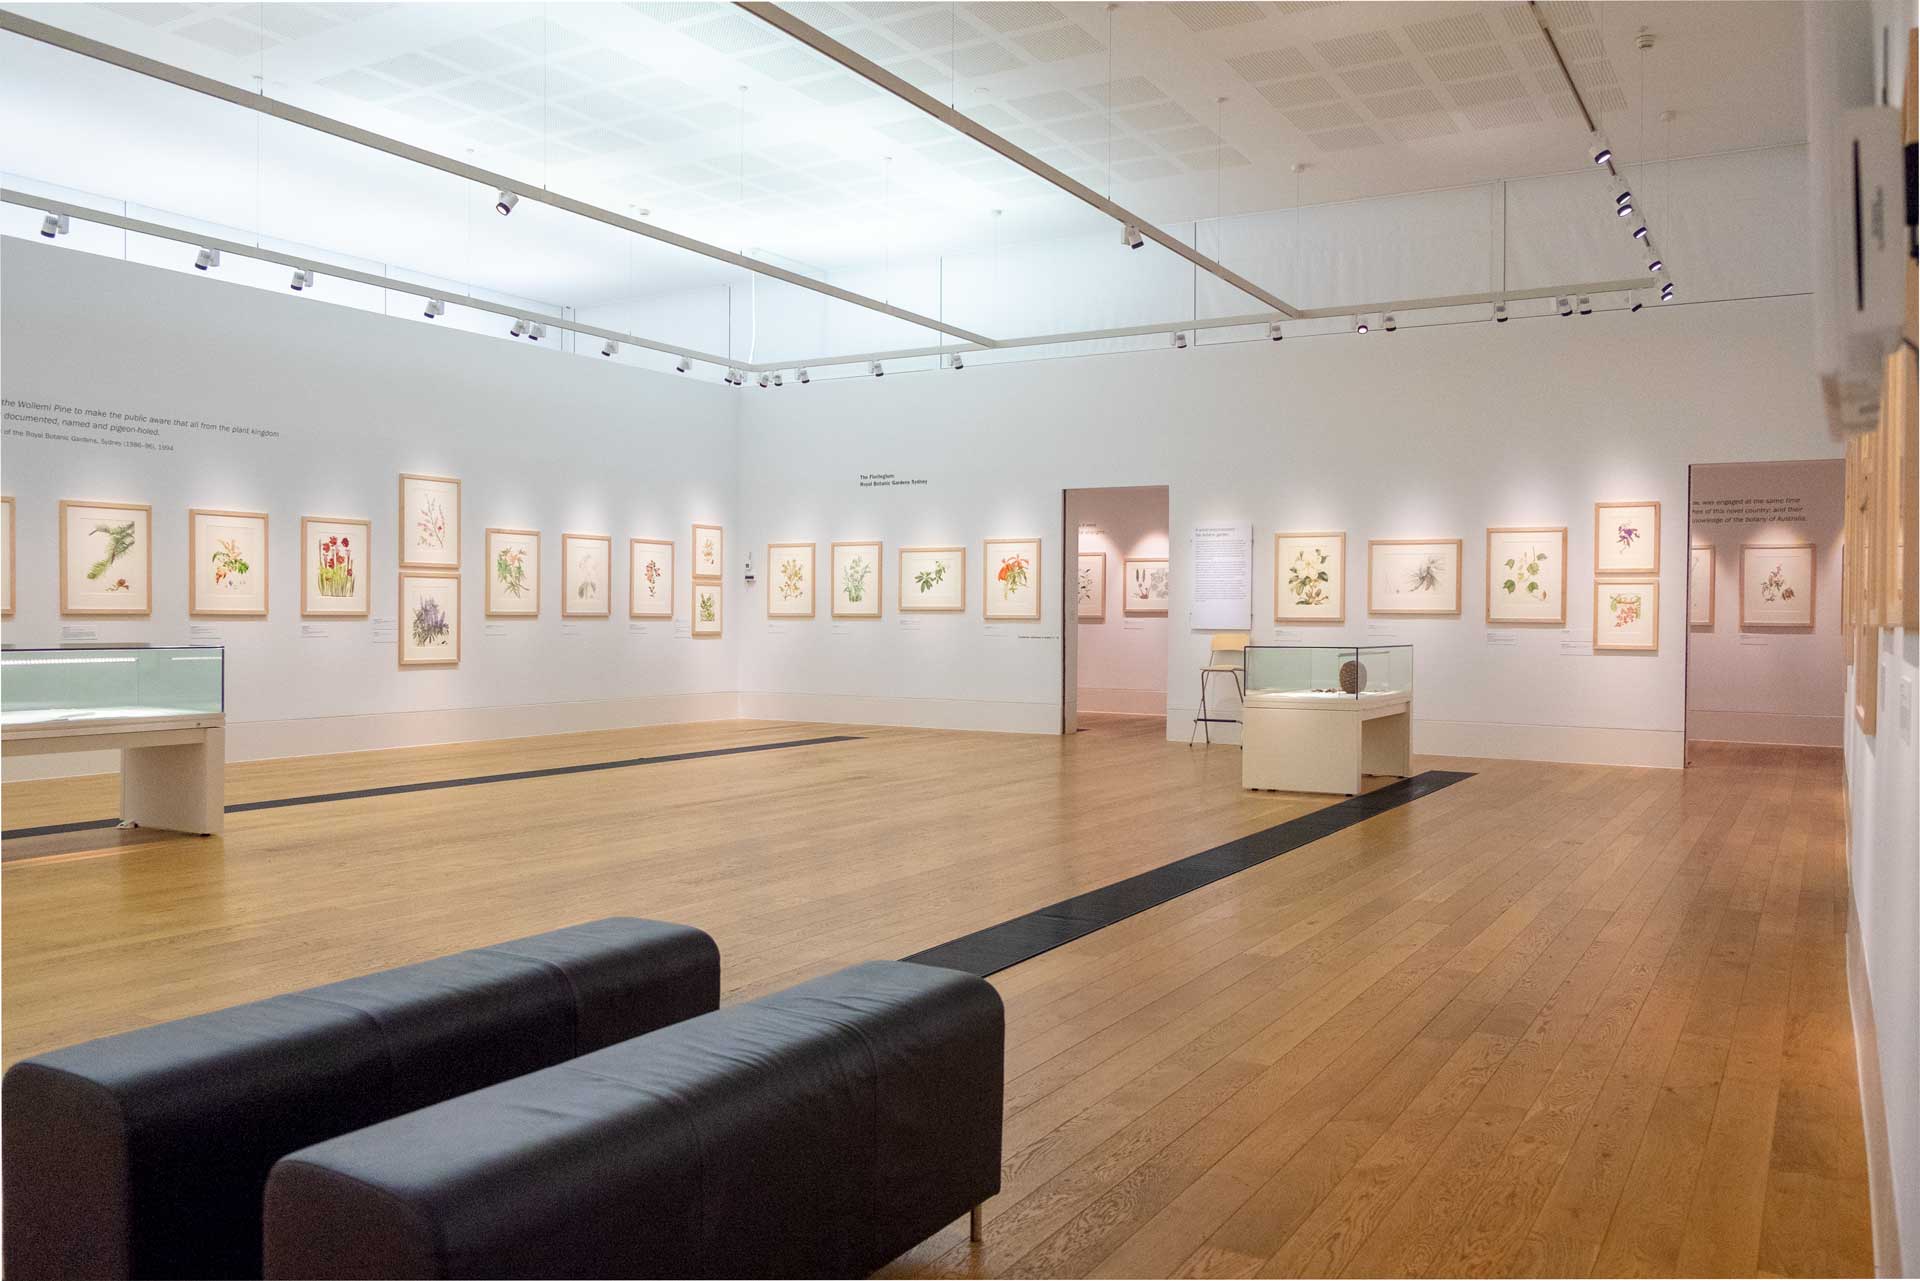 The interior of the Shirley Sherwood Gallery in Kew Gardens